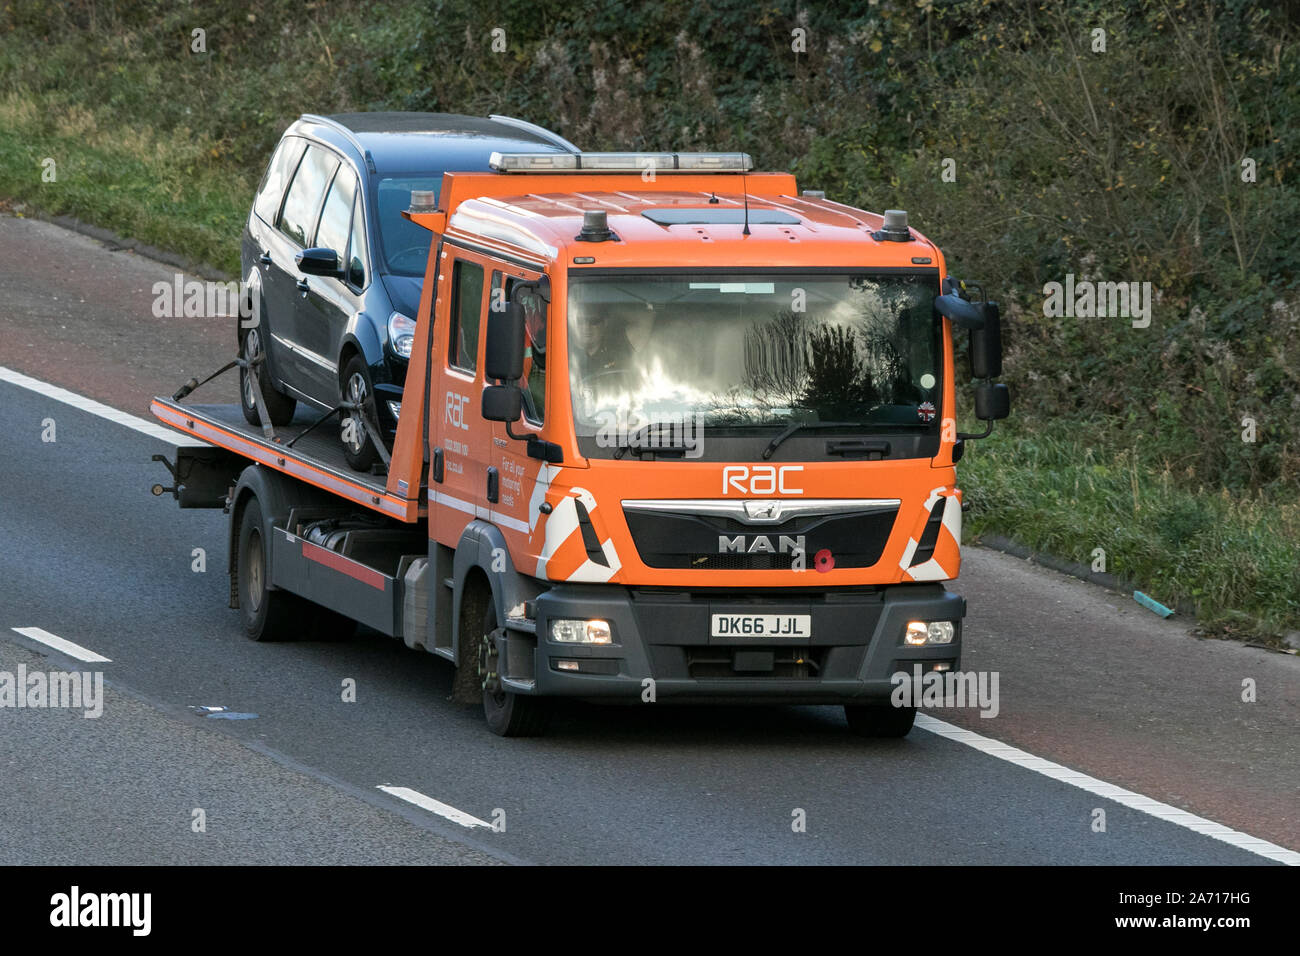 A MAN 24hr roadside RAC flatbed vehicle breakdown recovery truck traveling northbound on the M6 motorway near Garstang in Lancashire, UK Stock Photo